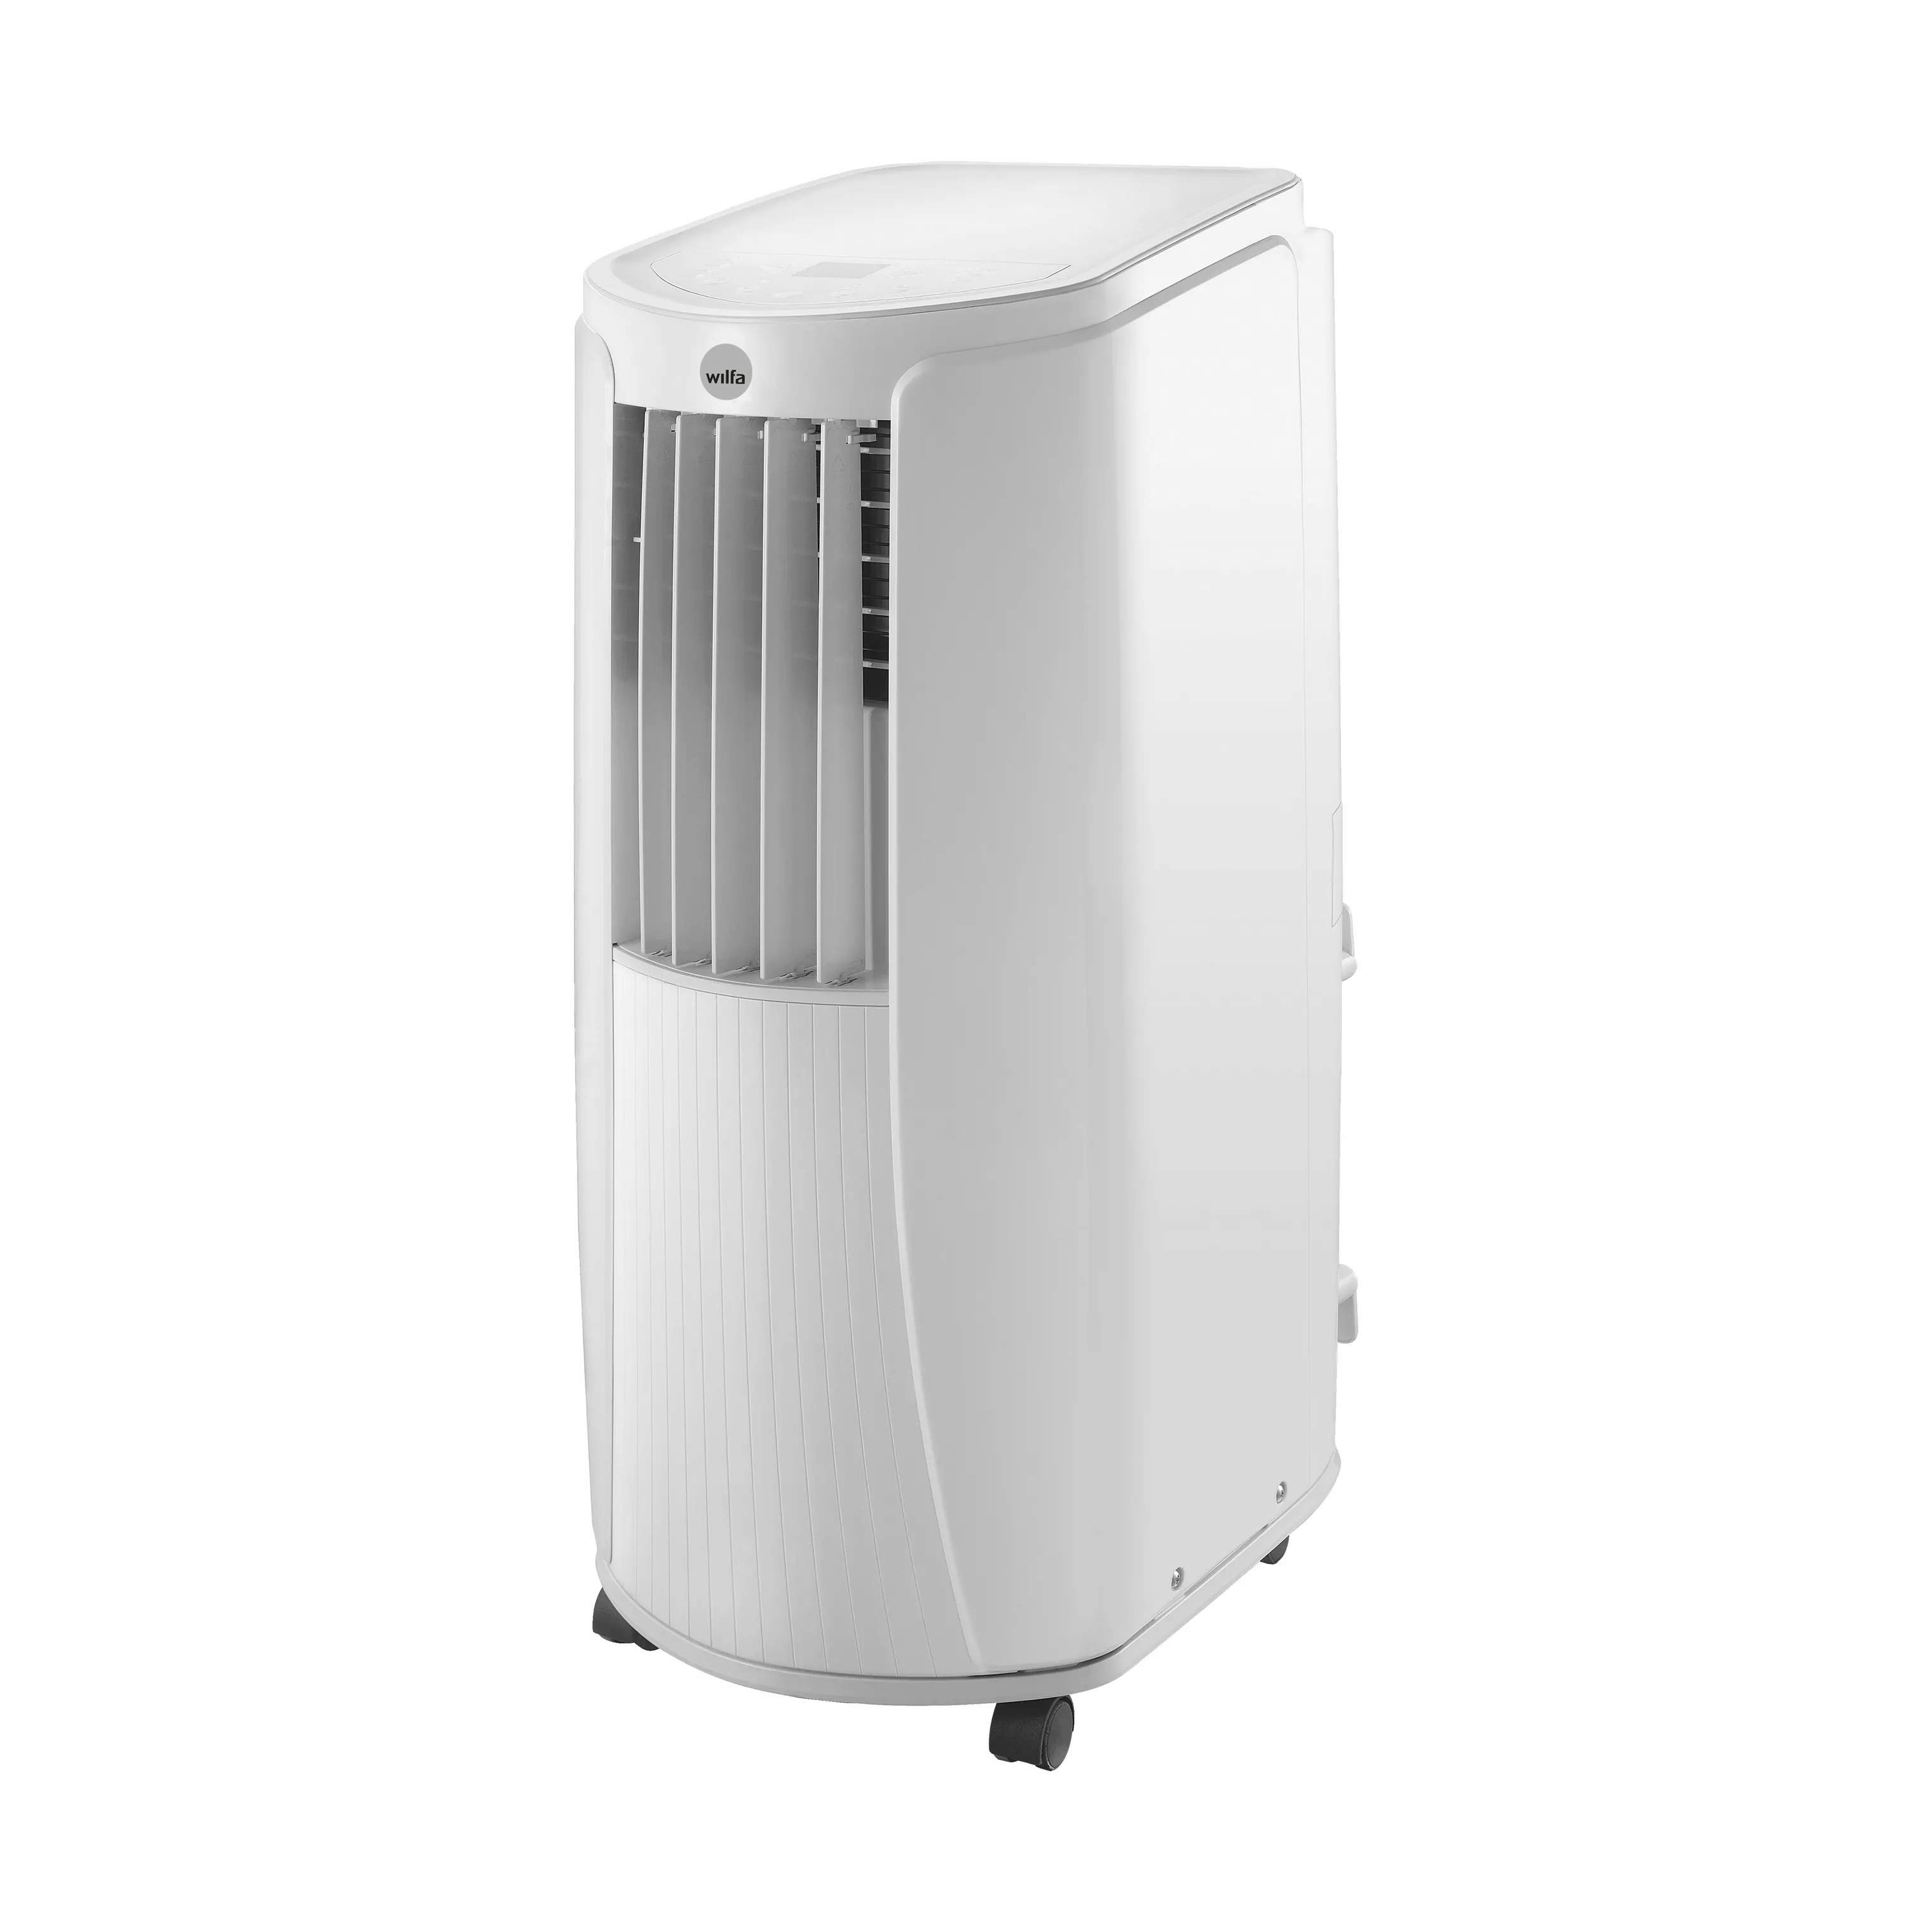 Wilfa aircondition COOL 7 Mobil Airconditioner